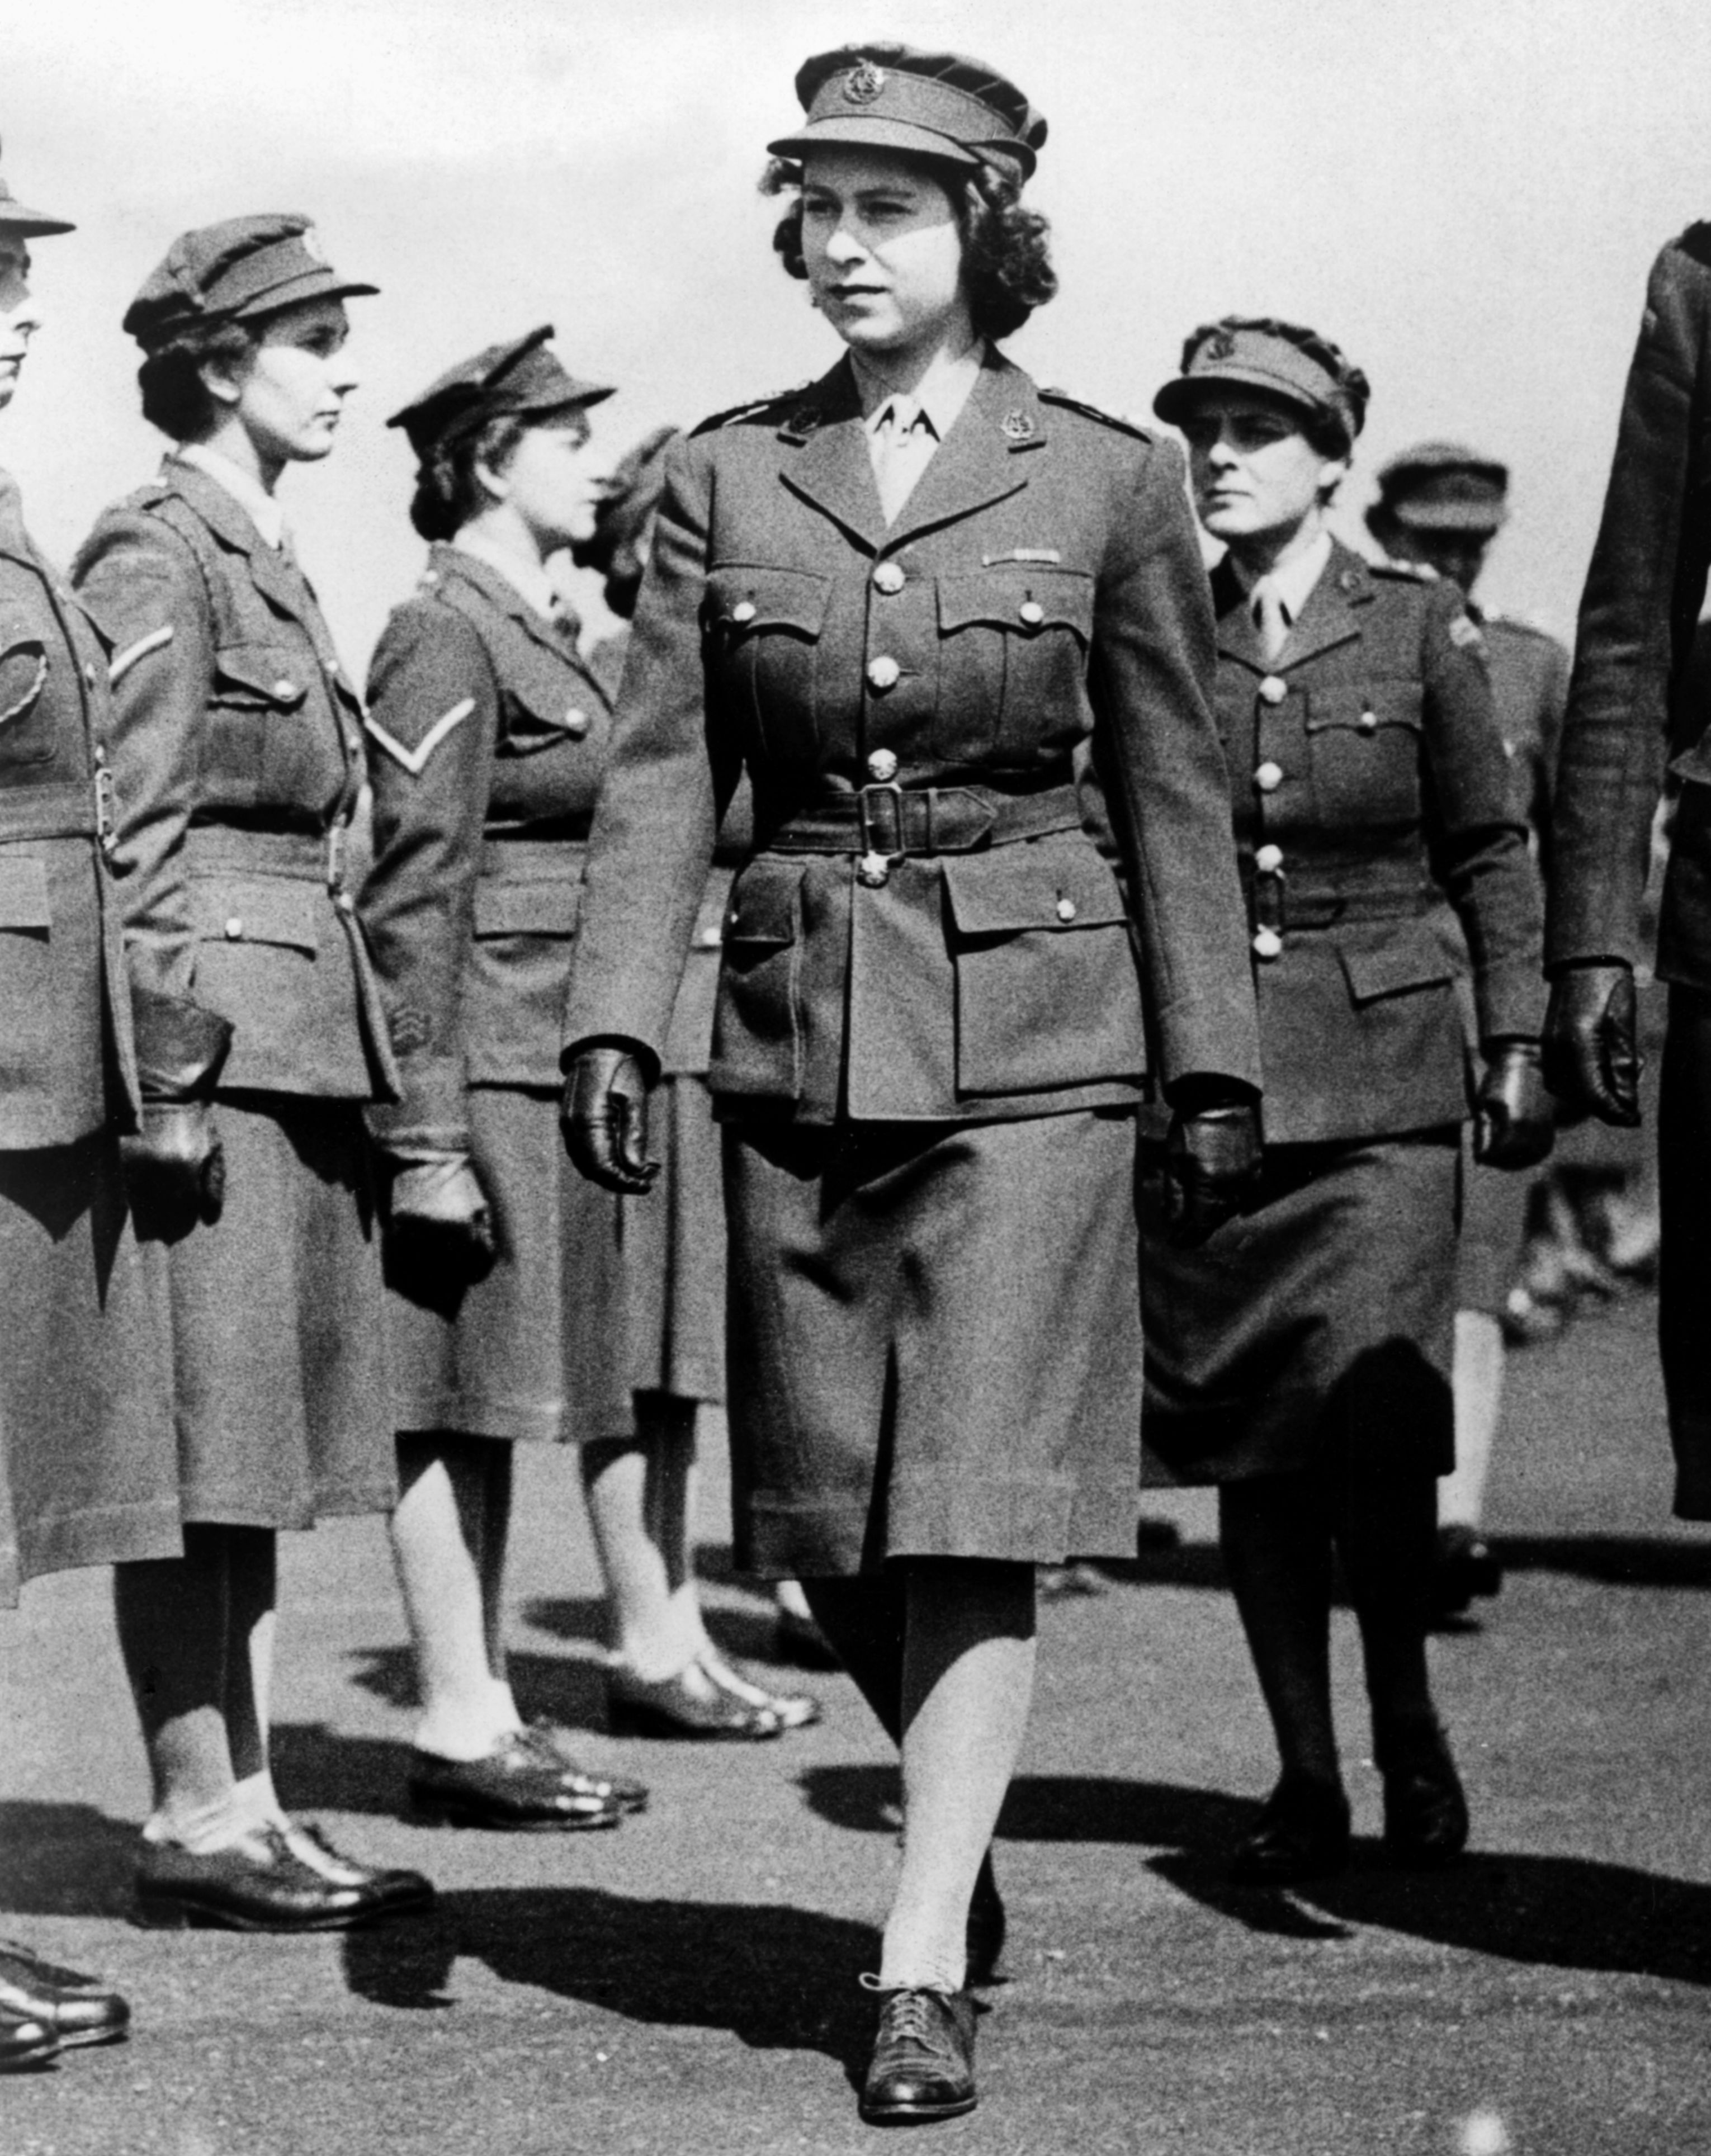 <p>Queen Elizabeth II (then Princess Elizabeth) is seen here during her days as a Junior Commander in the Auxiliary Territorial Service, the women's branch of the British army during World War II. She's pictured inspecting the Motor Transport Training Centre at Camberley in Surrey, England, in 1945 shortly before the war ended. She was the first female member of the royal family to join the armed services as a full-time active member.</p>